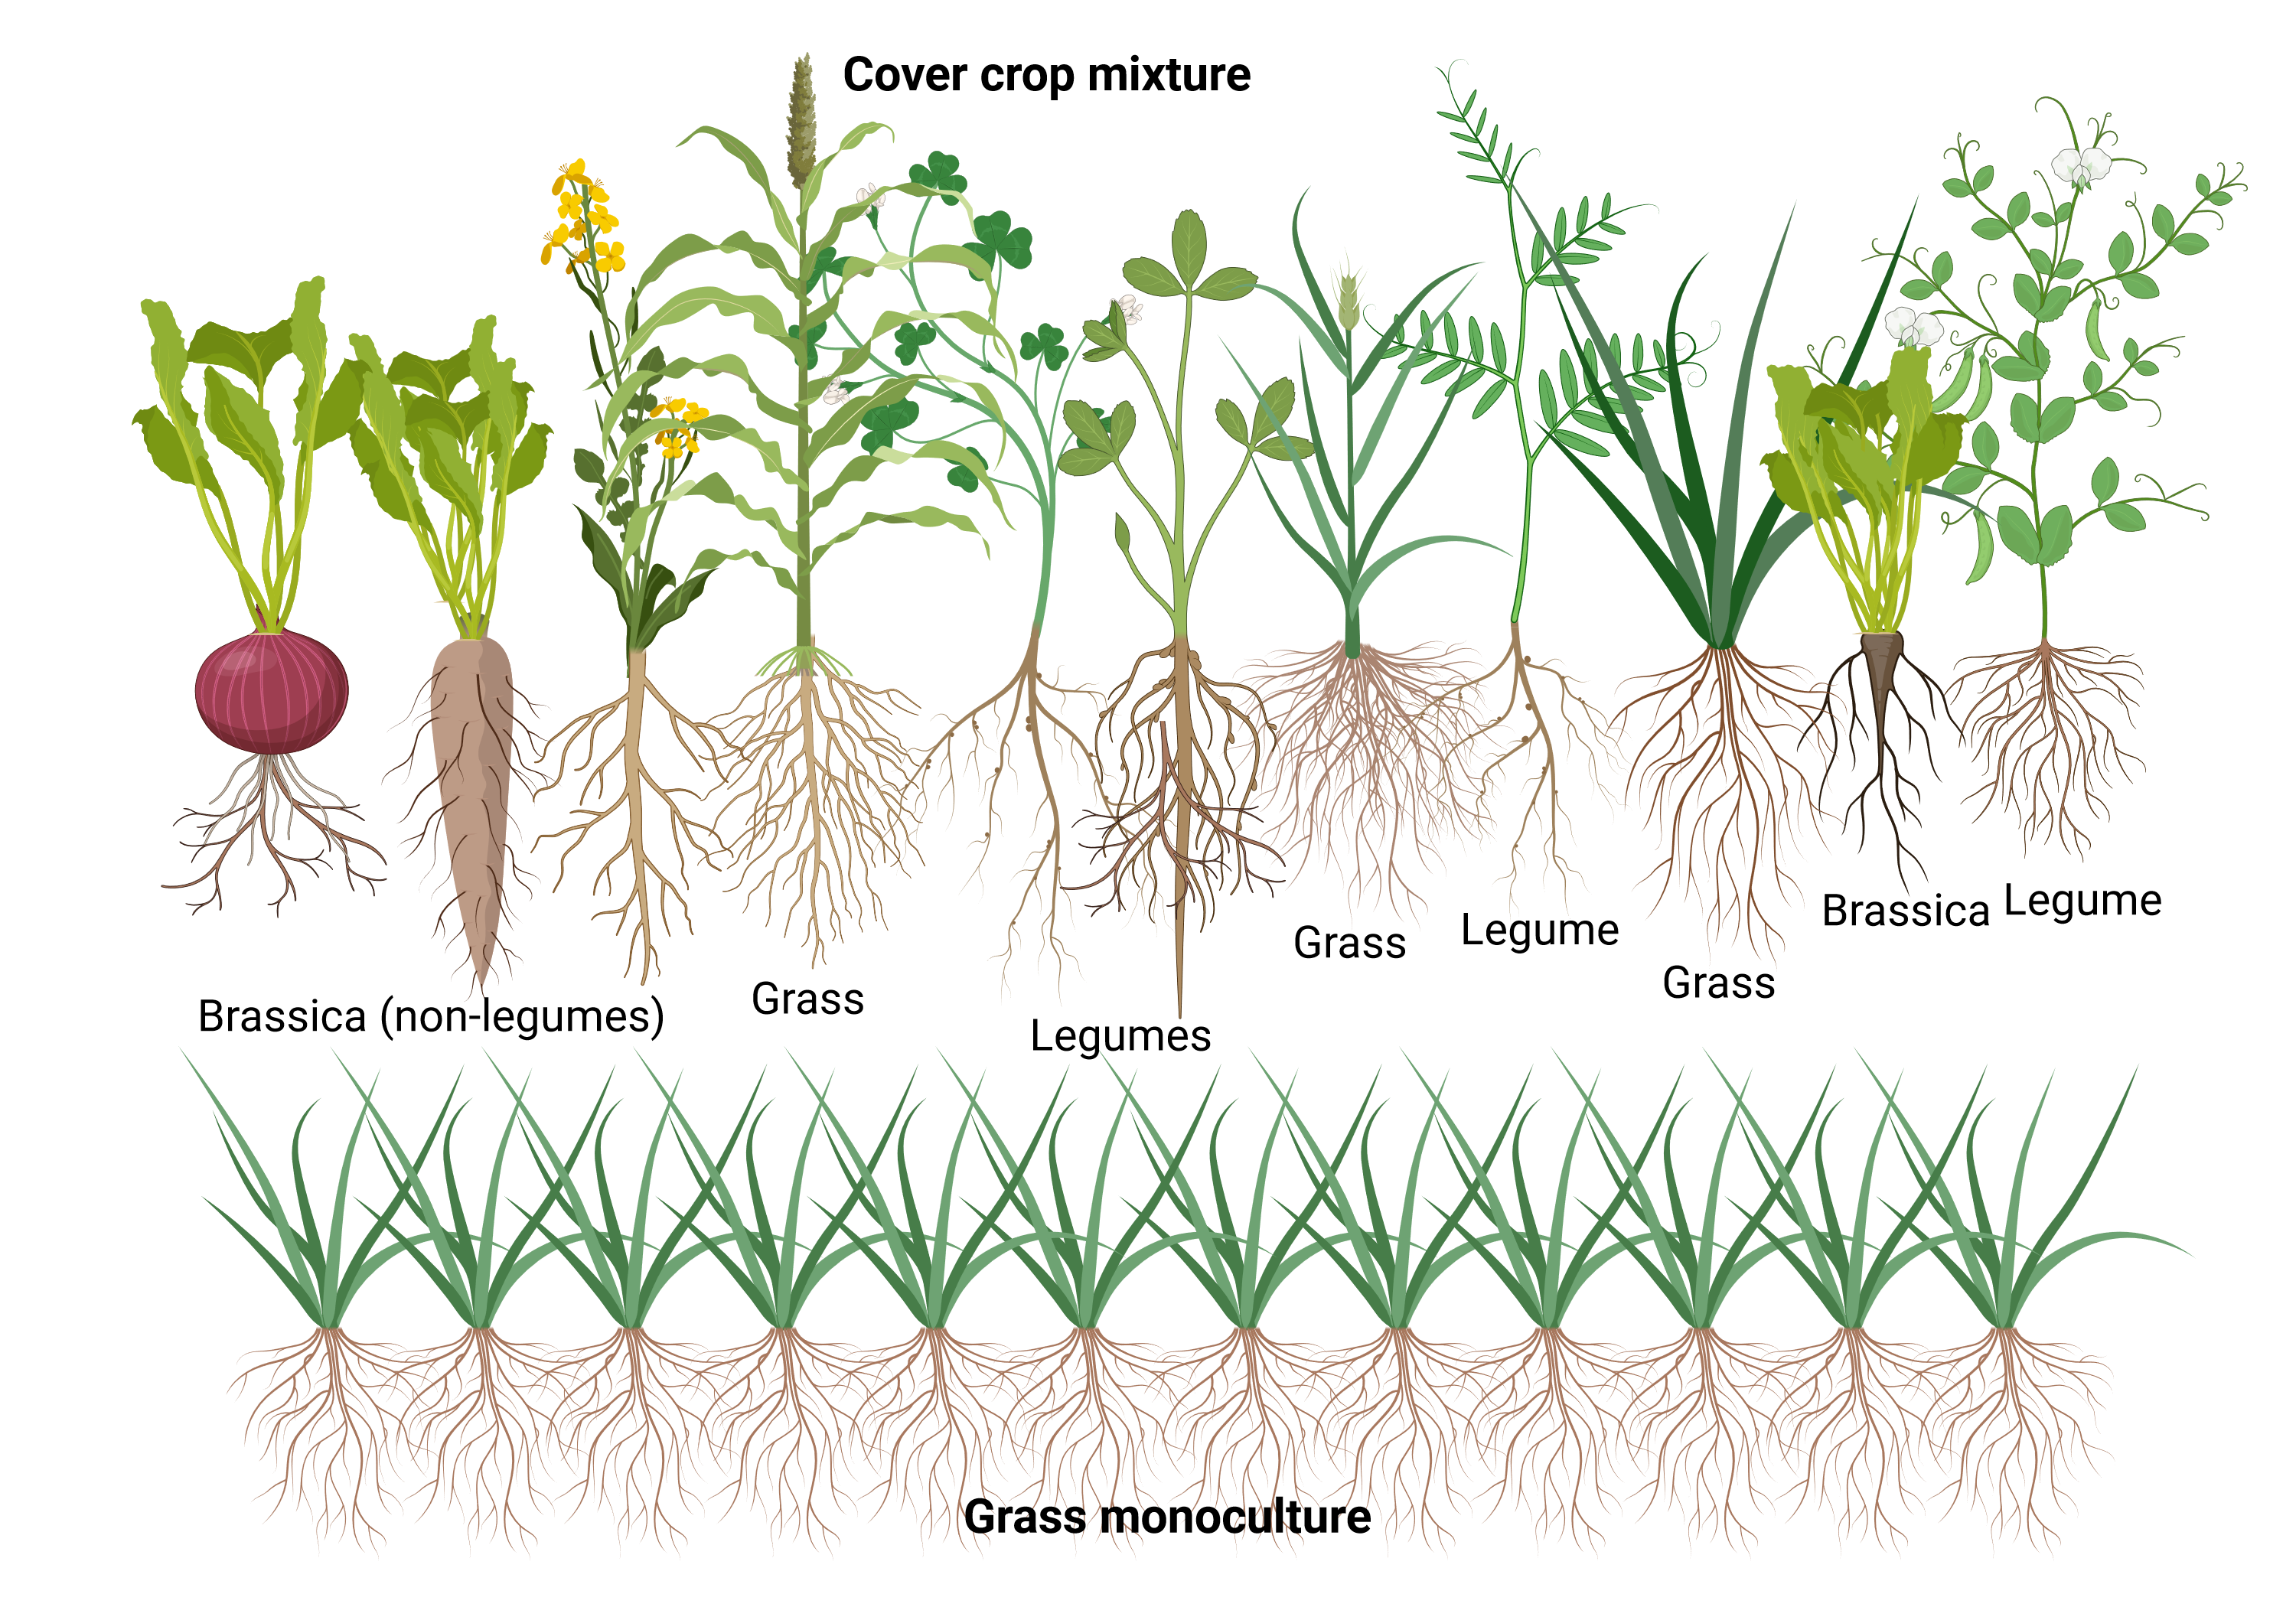 what is soil science in agriculture essay